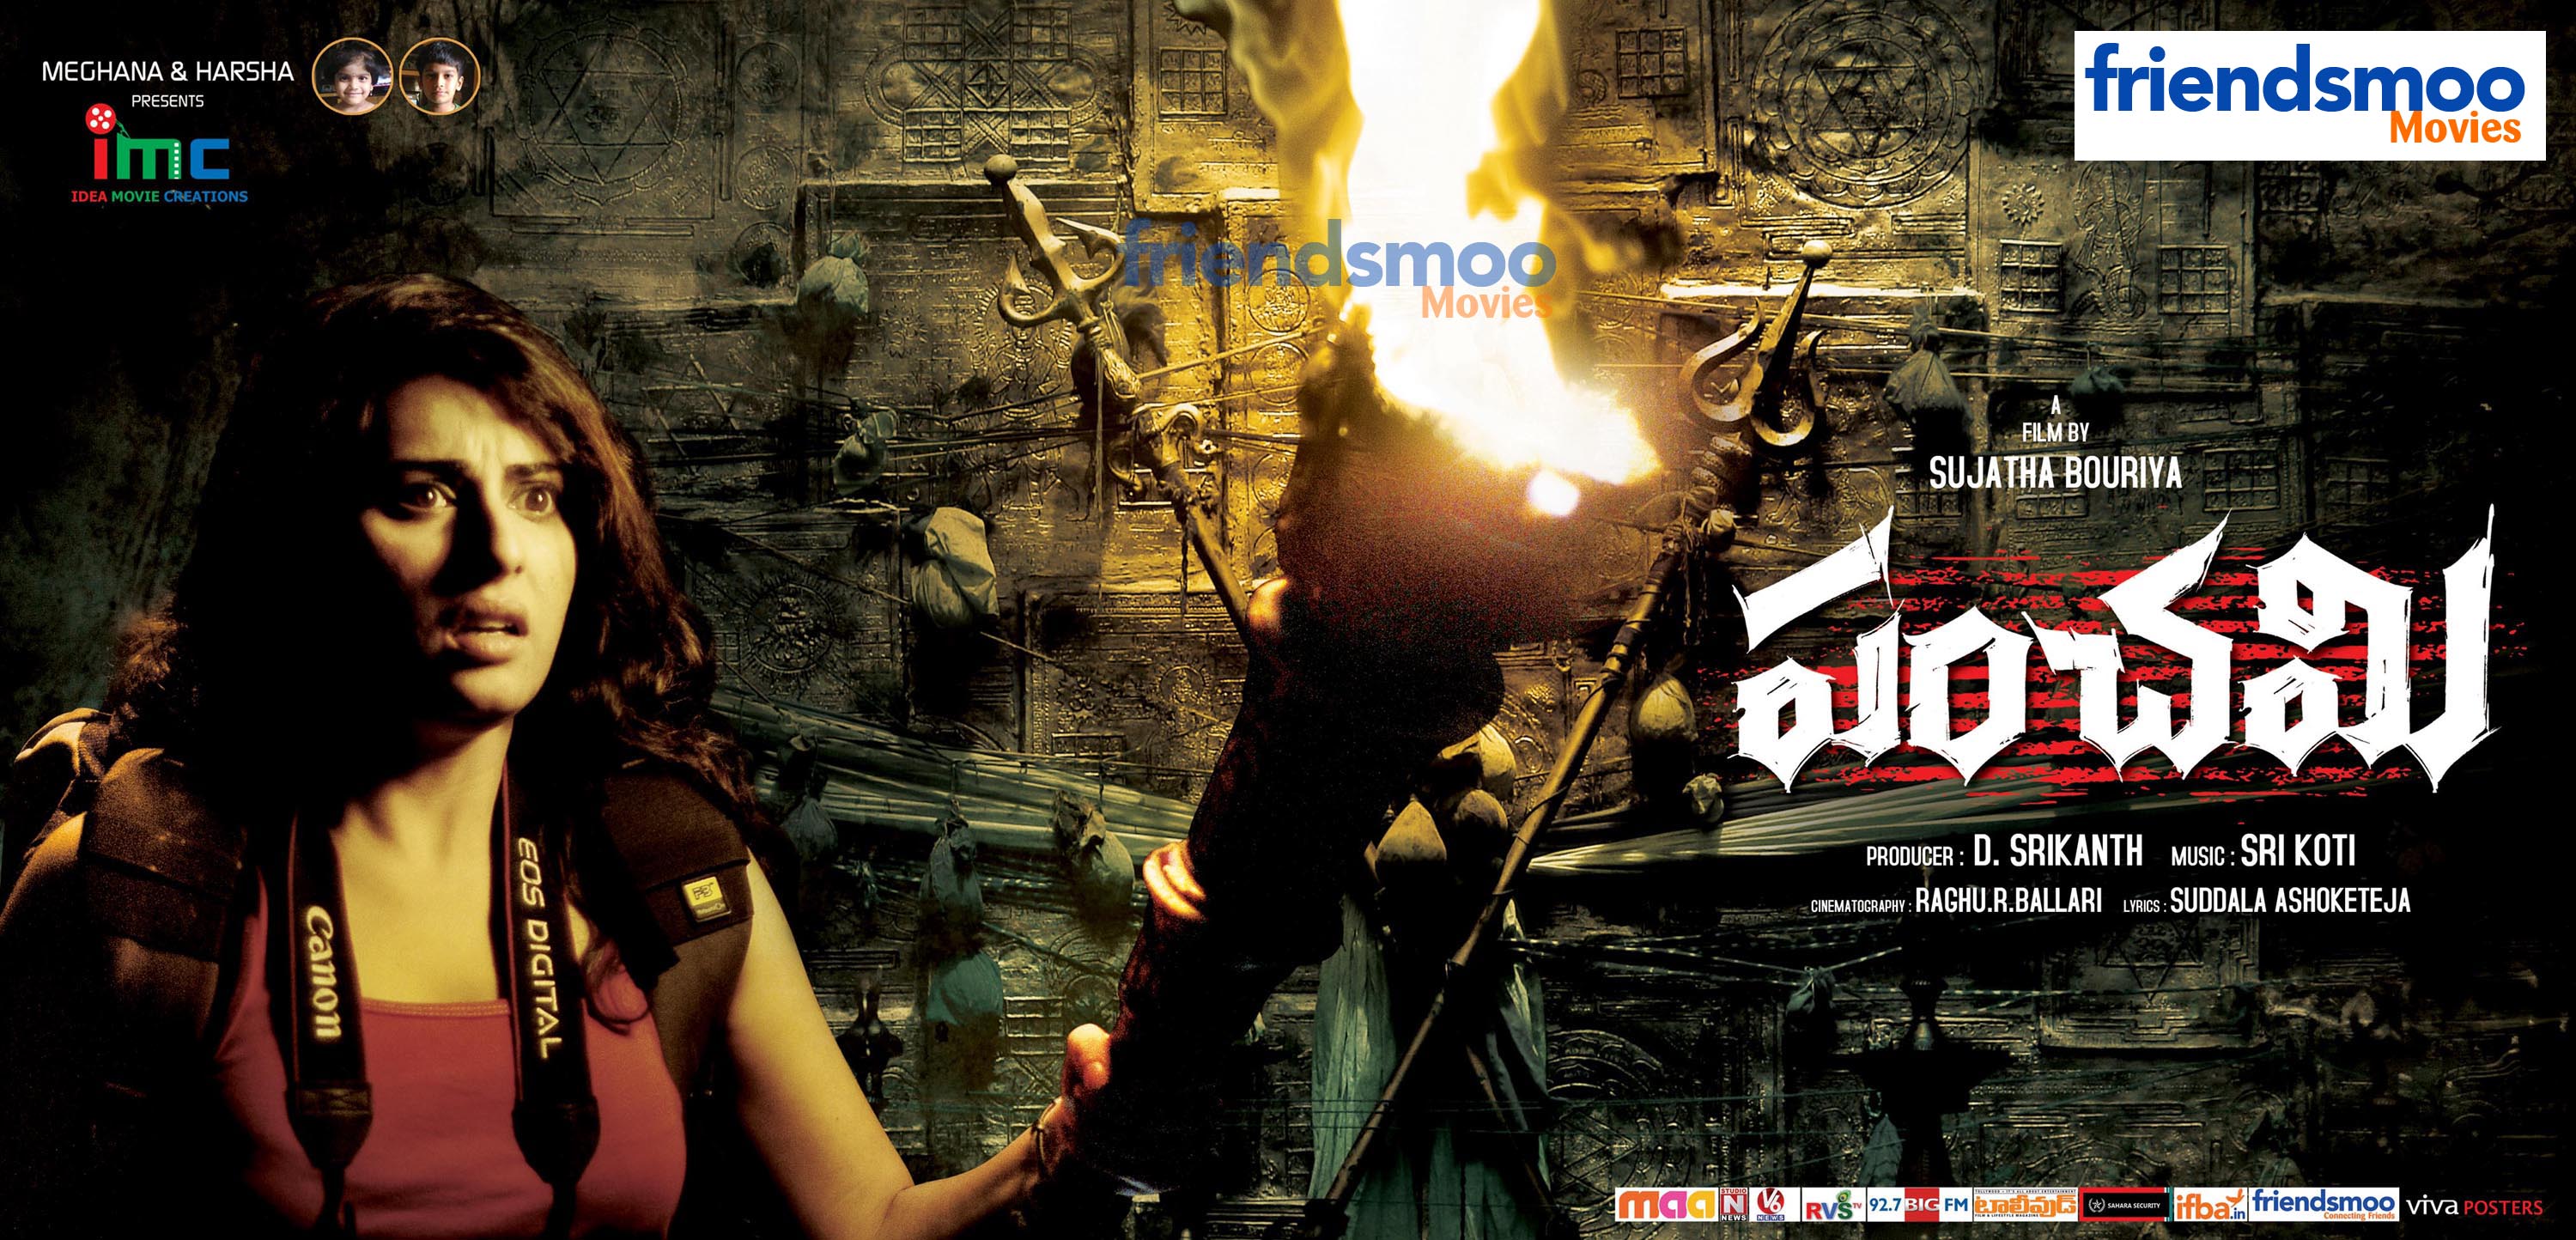 Panchami First Single Character Movie in Tollywood.